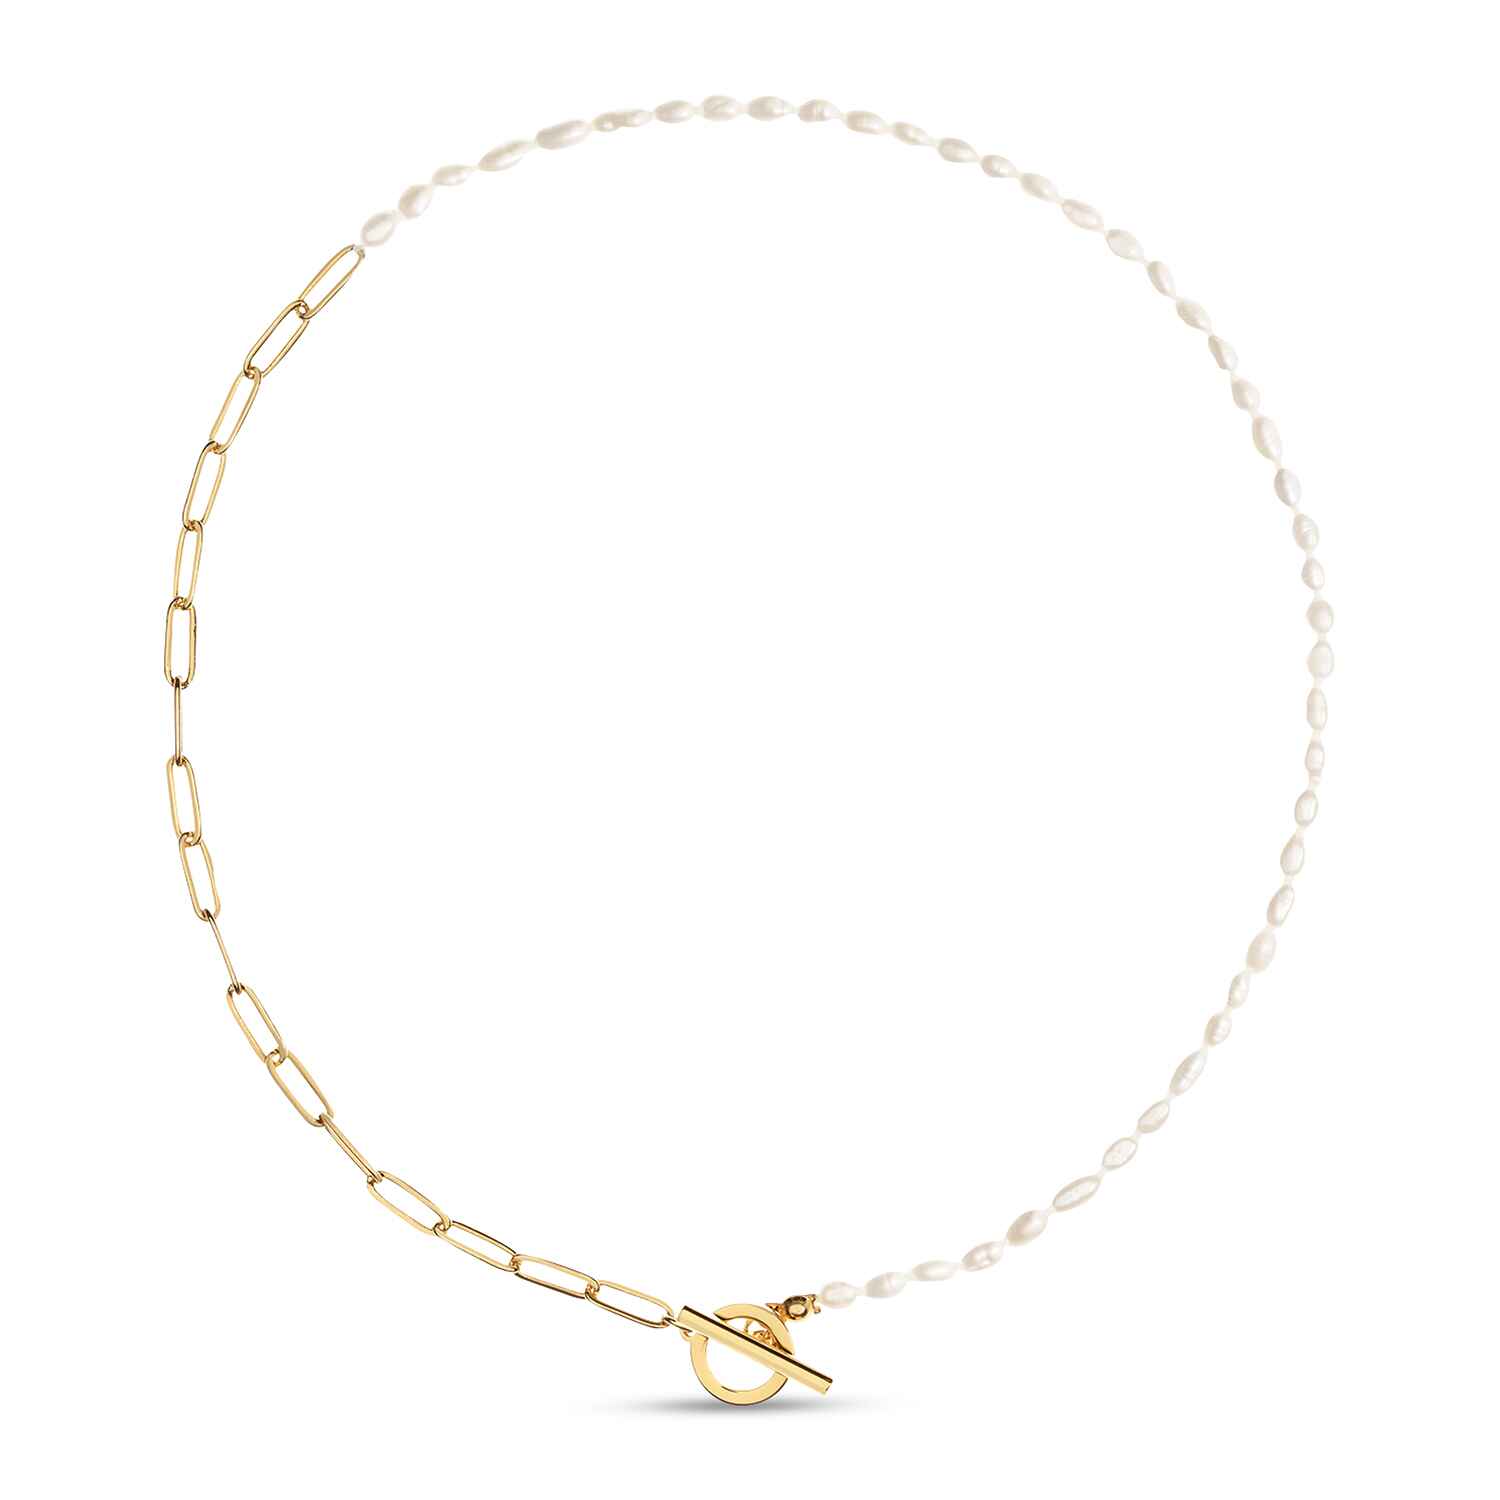 Elevate your every day style with the Alba Mixed White Pearl and Gold Chain necklace. This dainty and timeless necklace is adorned with sustainably sourced white pearls.